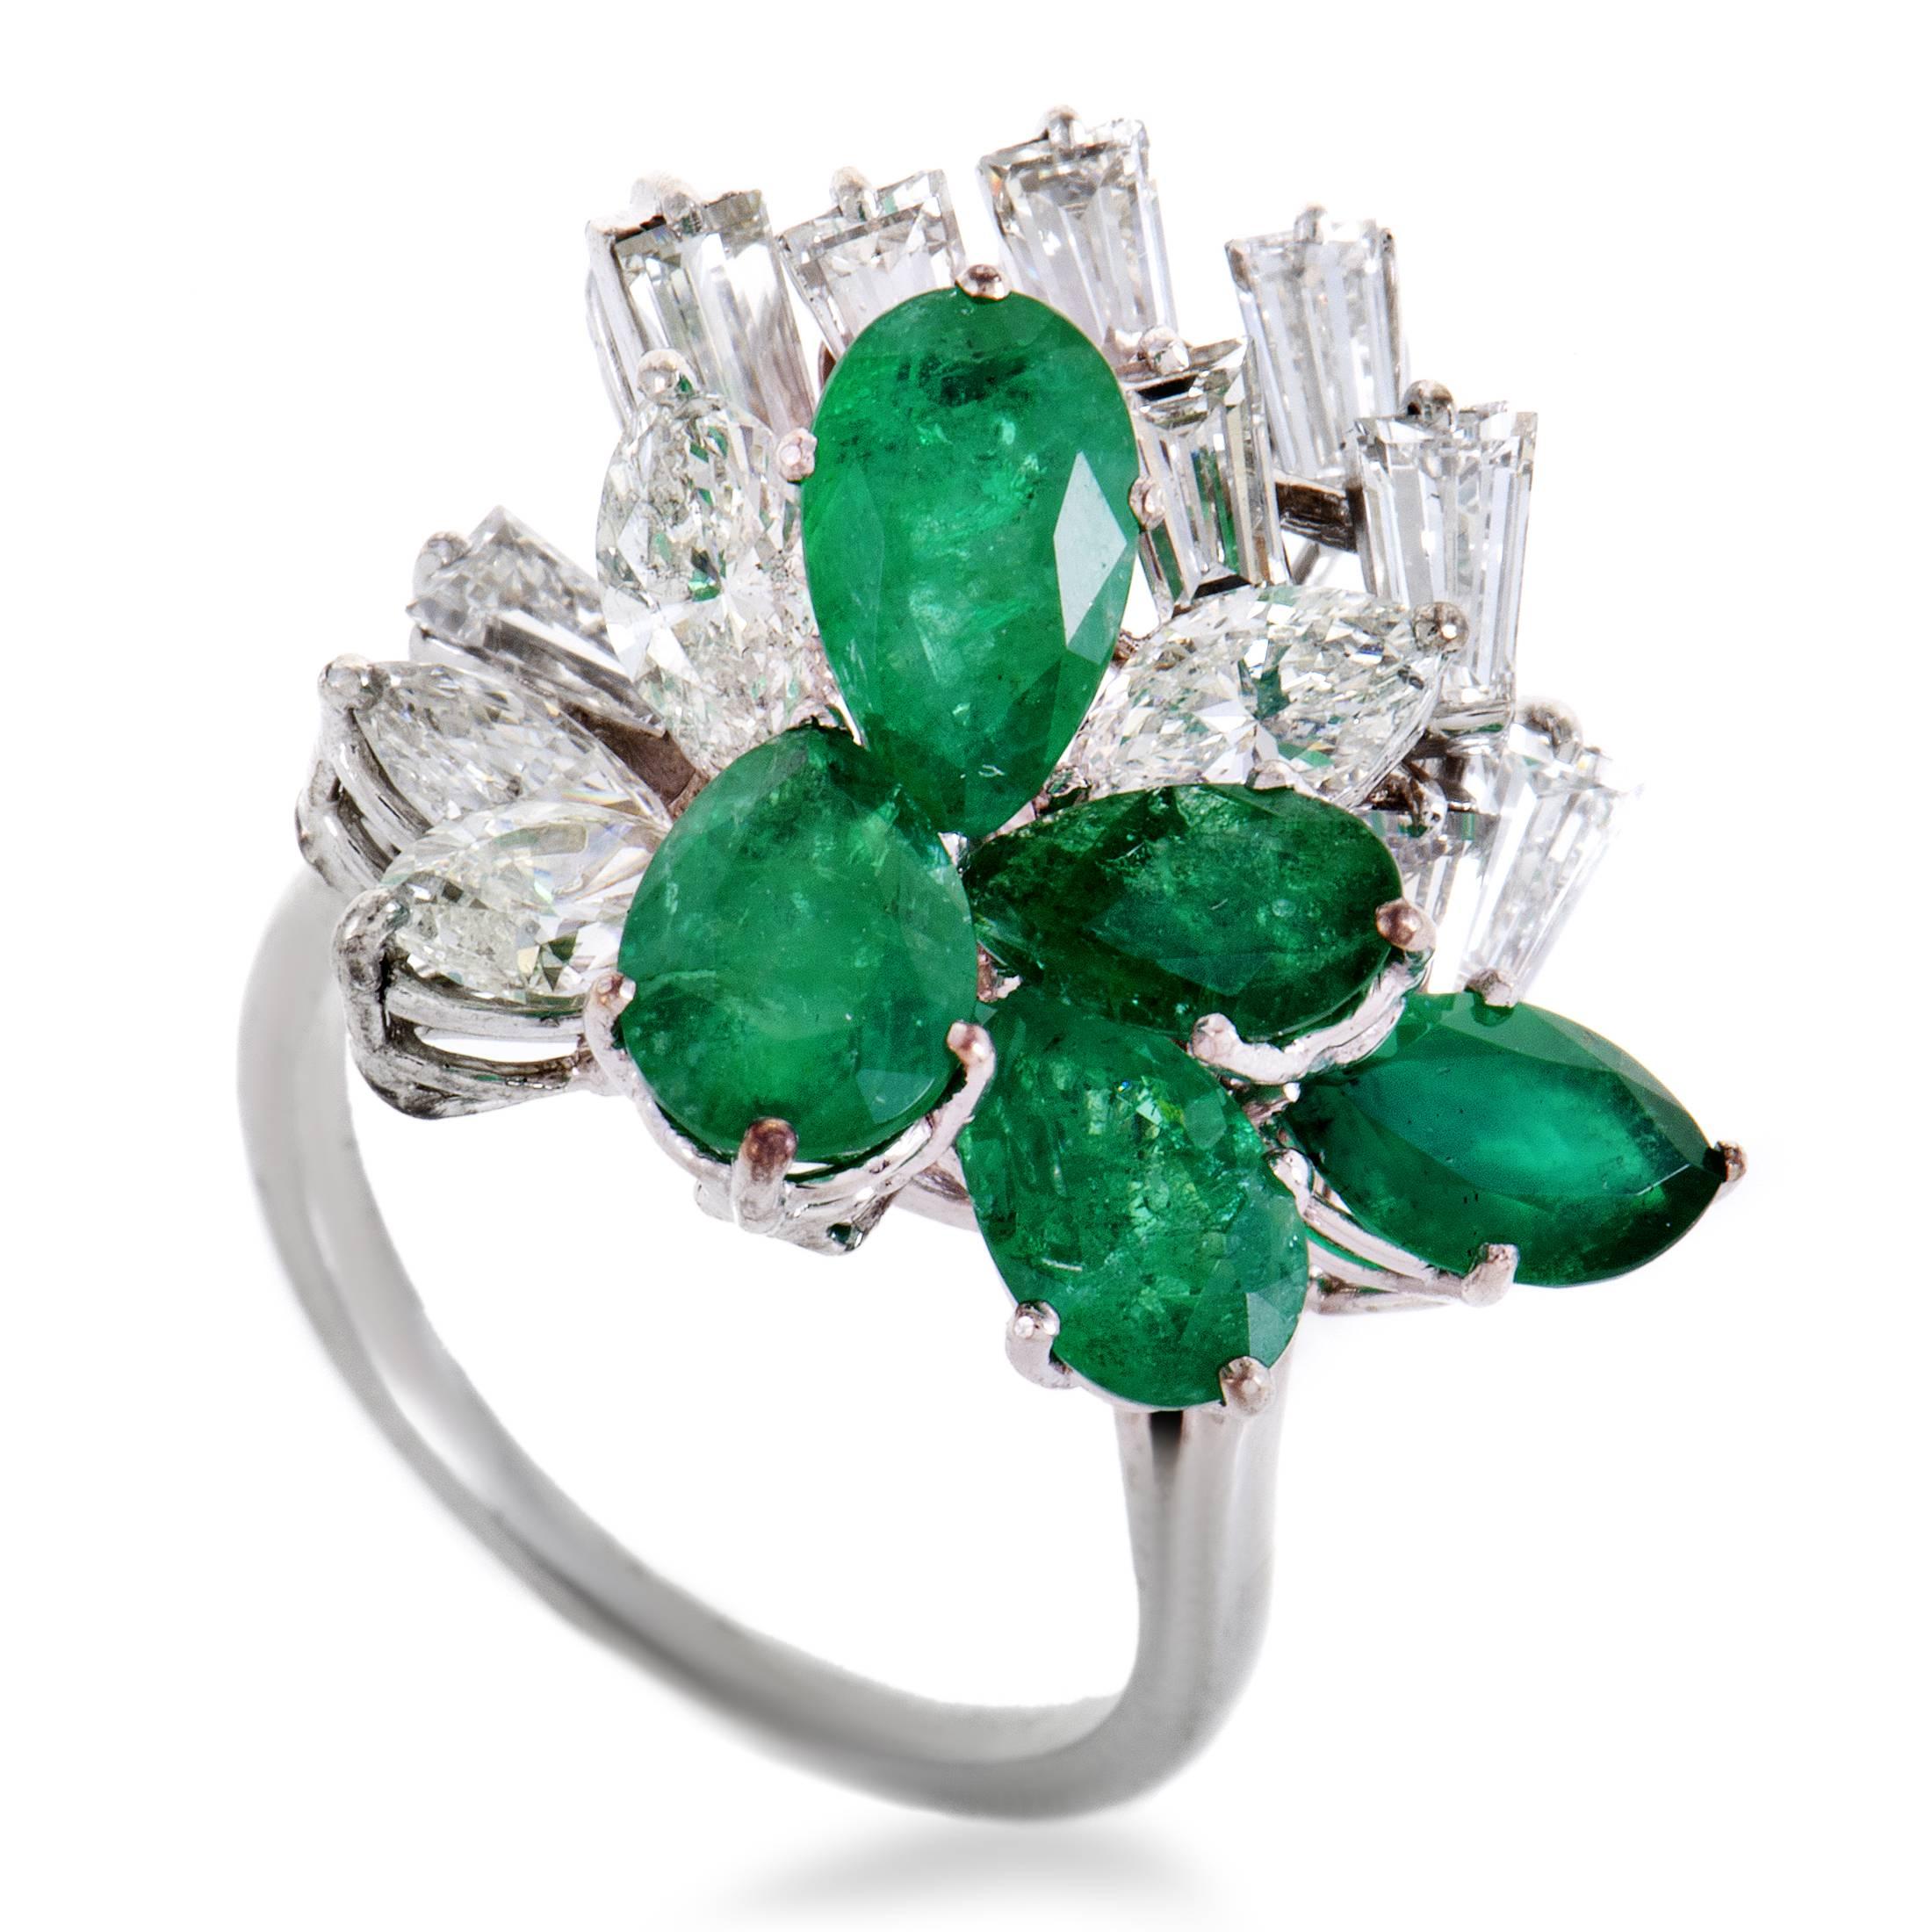 A majestic idea is executed expertly in this amazing ring made of luxurious 18K white gold which is set with lustrous diamonds amounting approximately to 2.50 carats as well as magnificent emeralds weighing in total 3.50 carats.
Ring Top Dimensions: